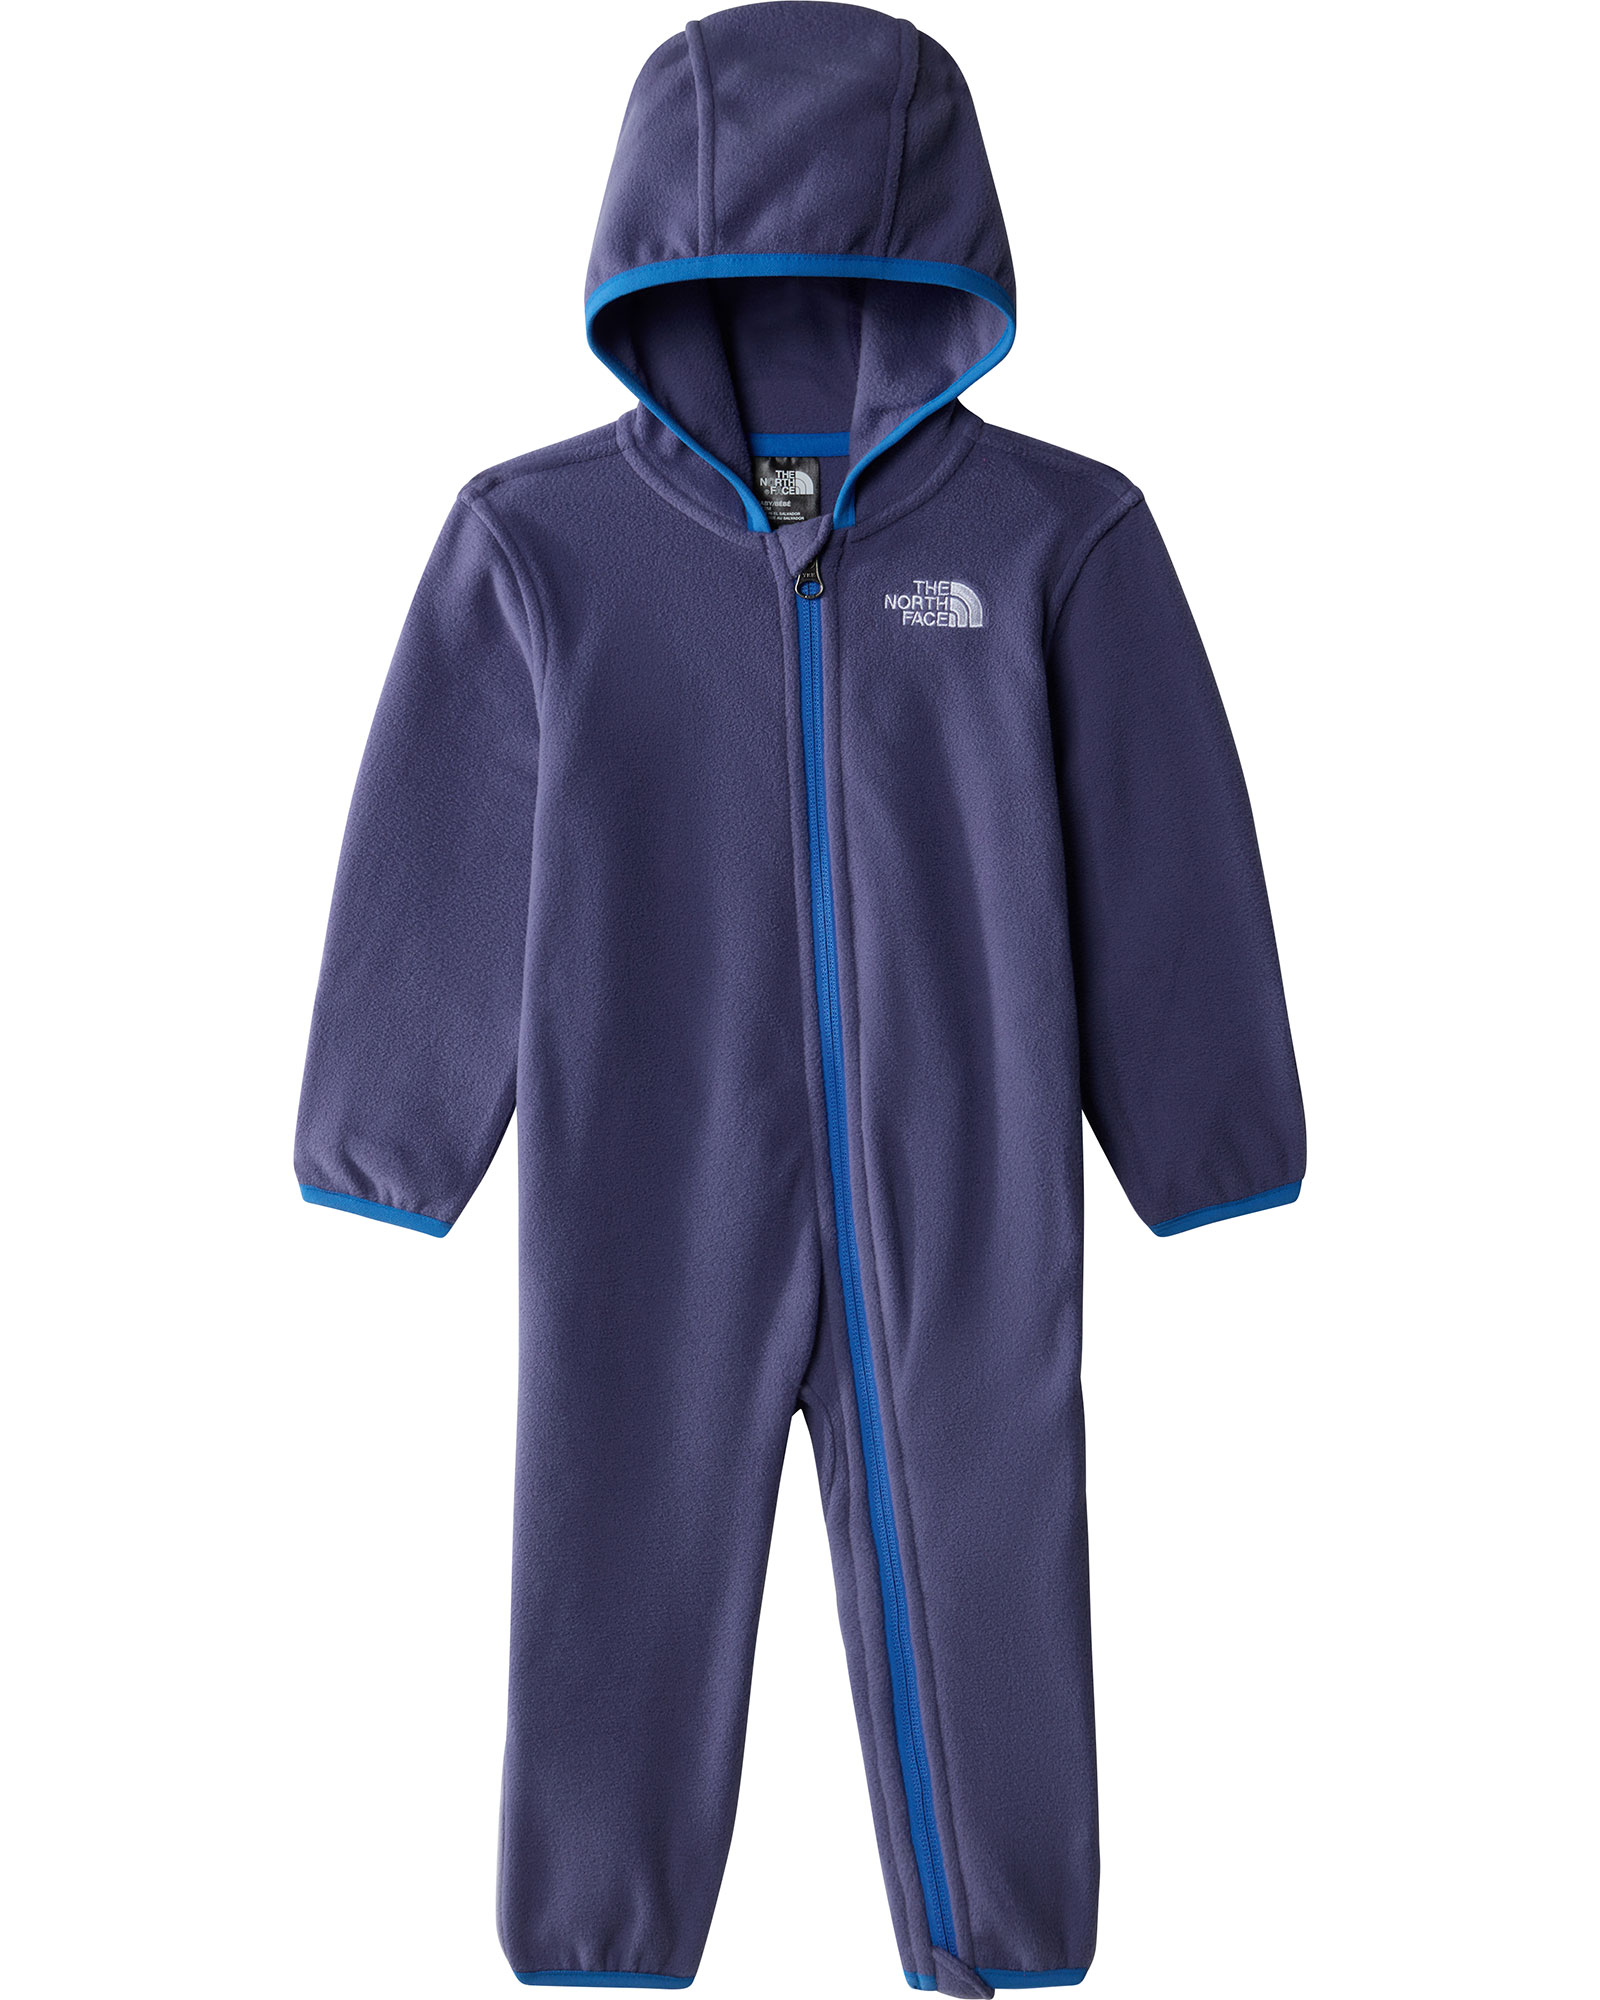 The North Face Baby Glacier One Piece - Cave Blue 3